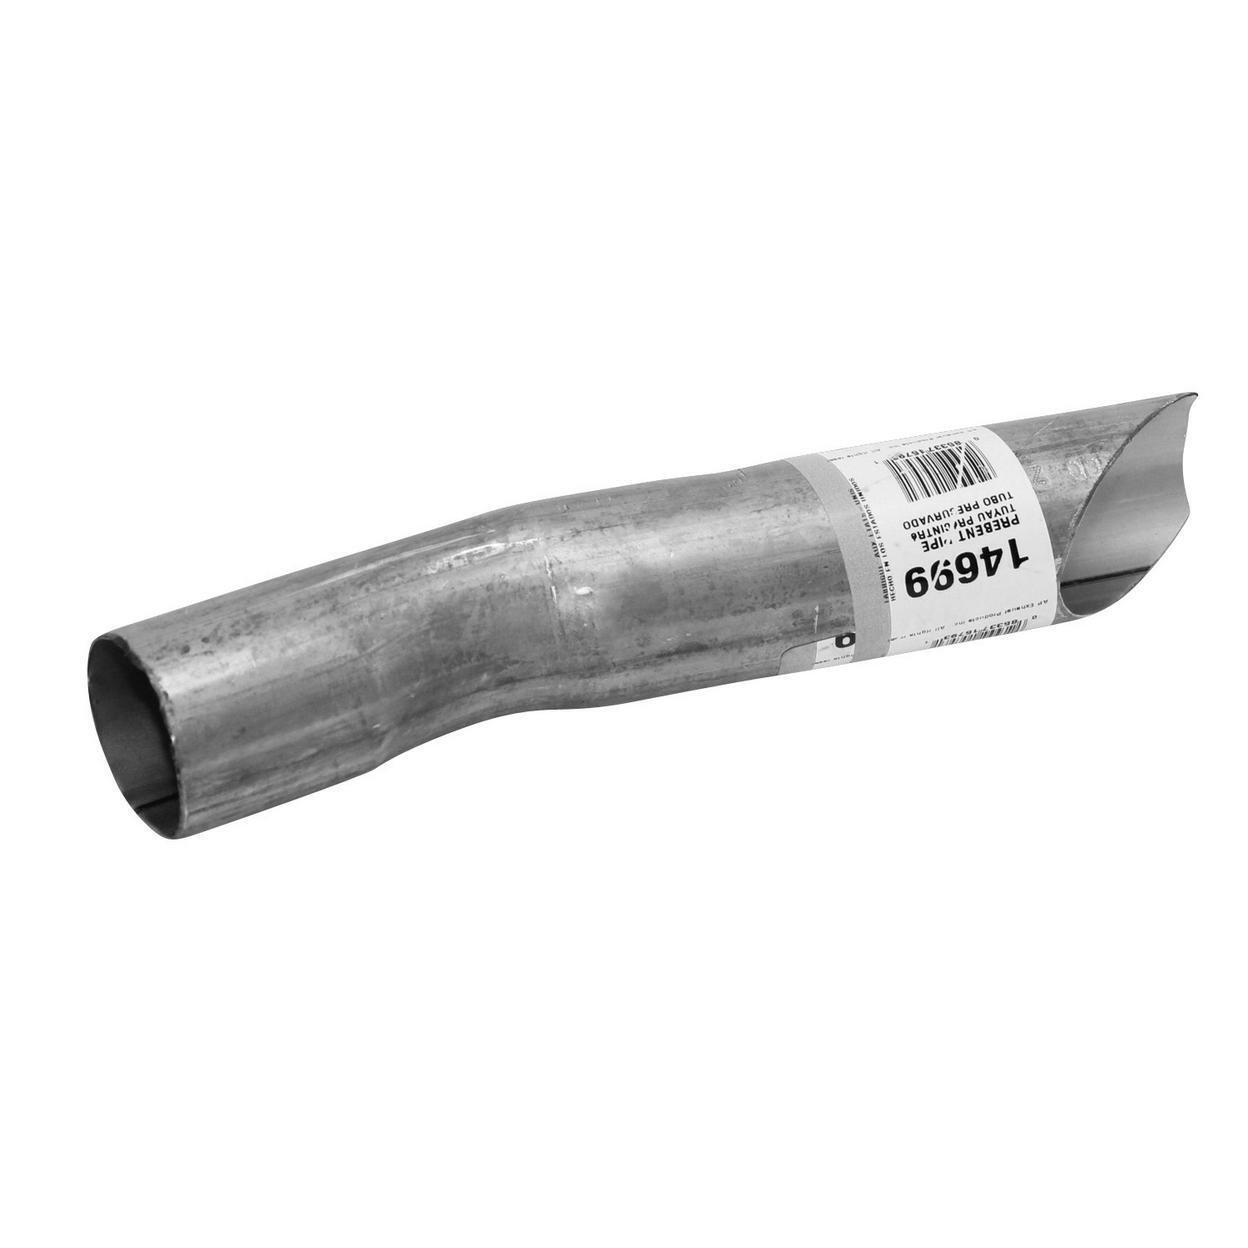 Exhaust Tail Pipe for 1993-1996 Chevrolet Corsica 2.2L L4 GAS OHV